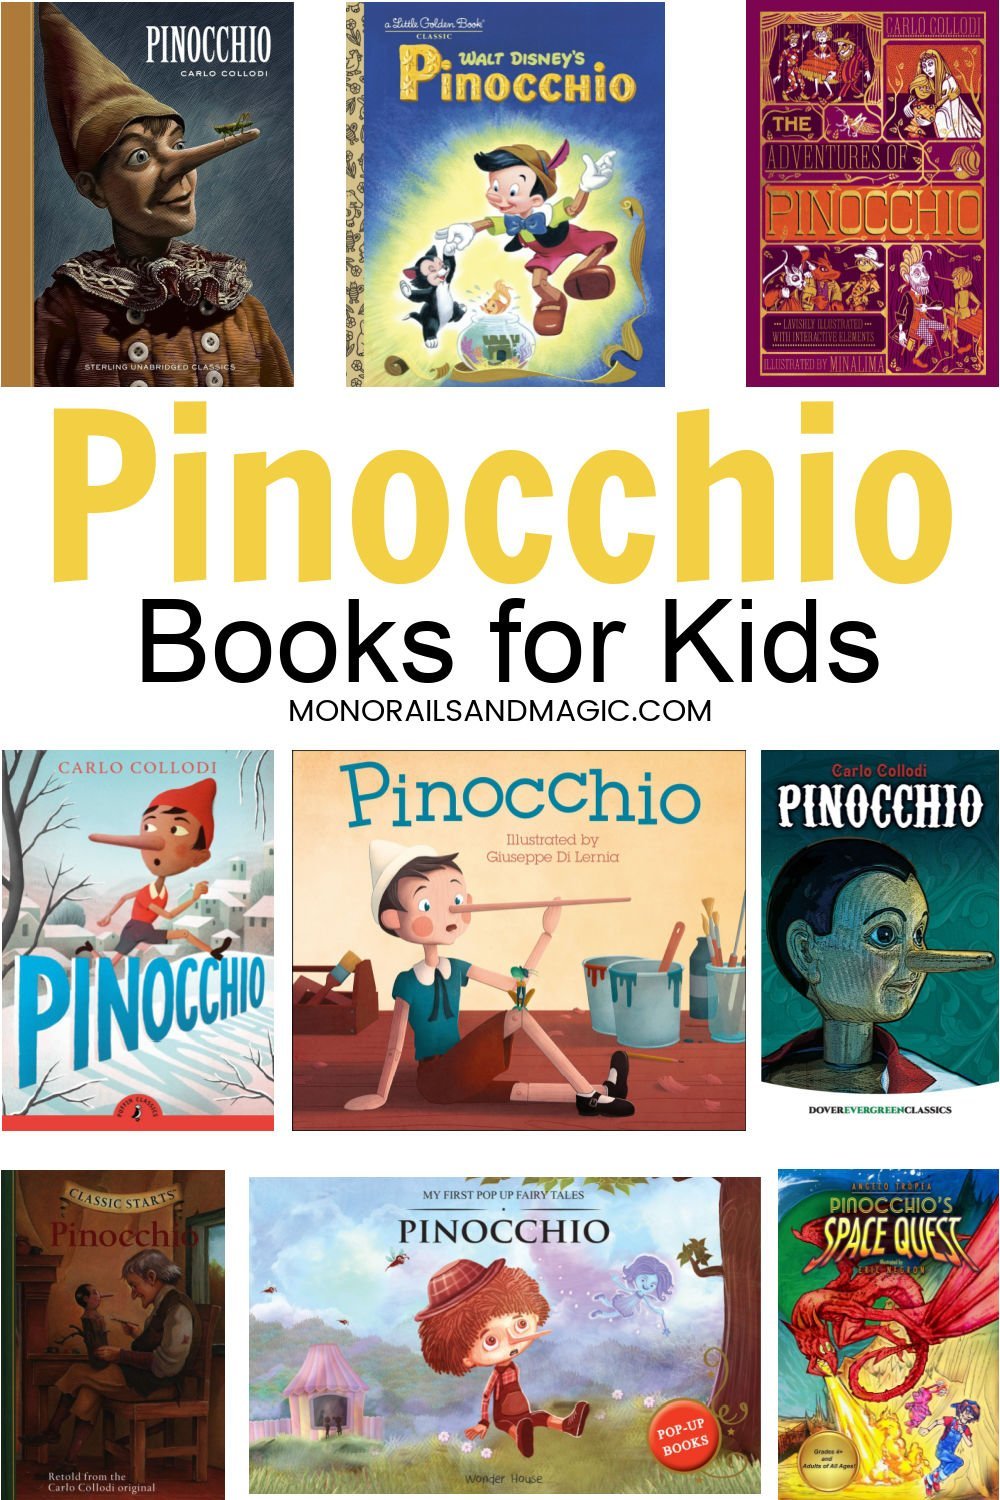 A list of Pinocchio books for kids.